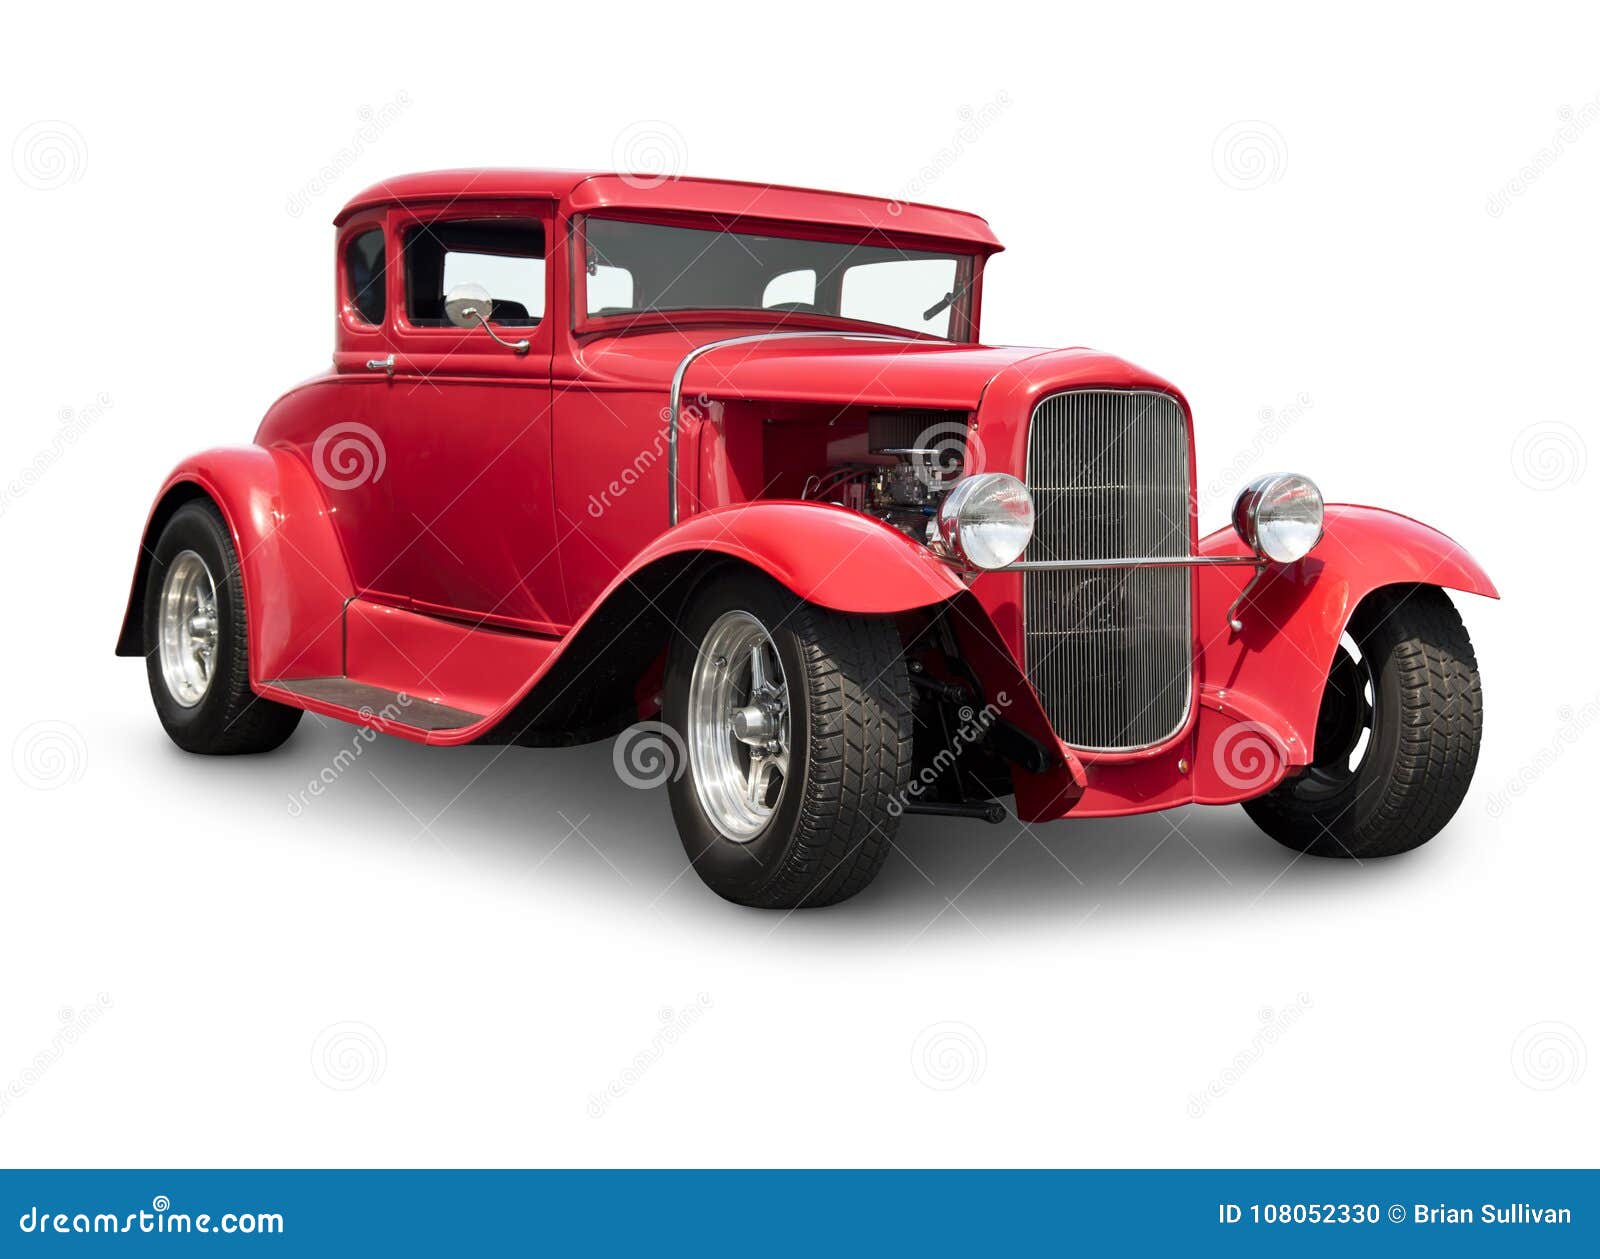 red hot rod car with clipping path